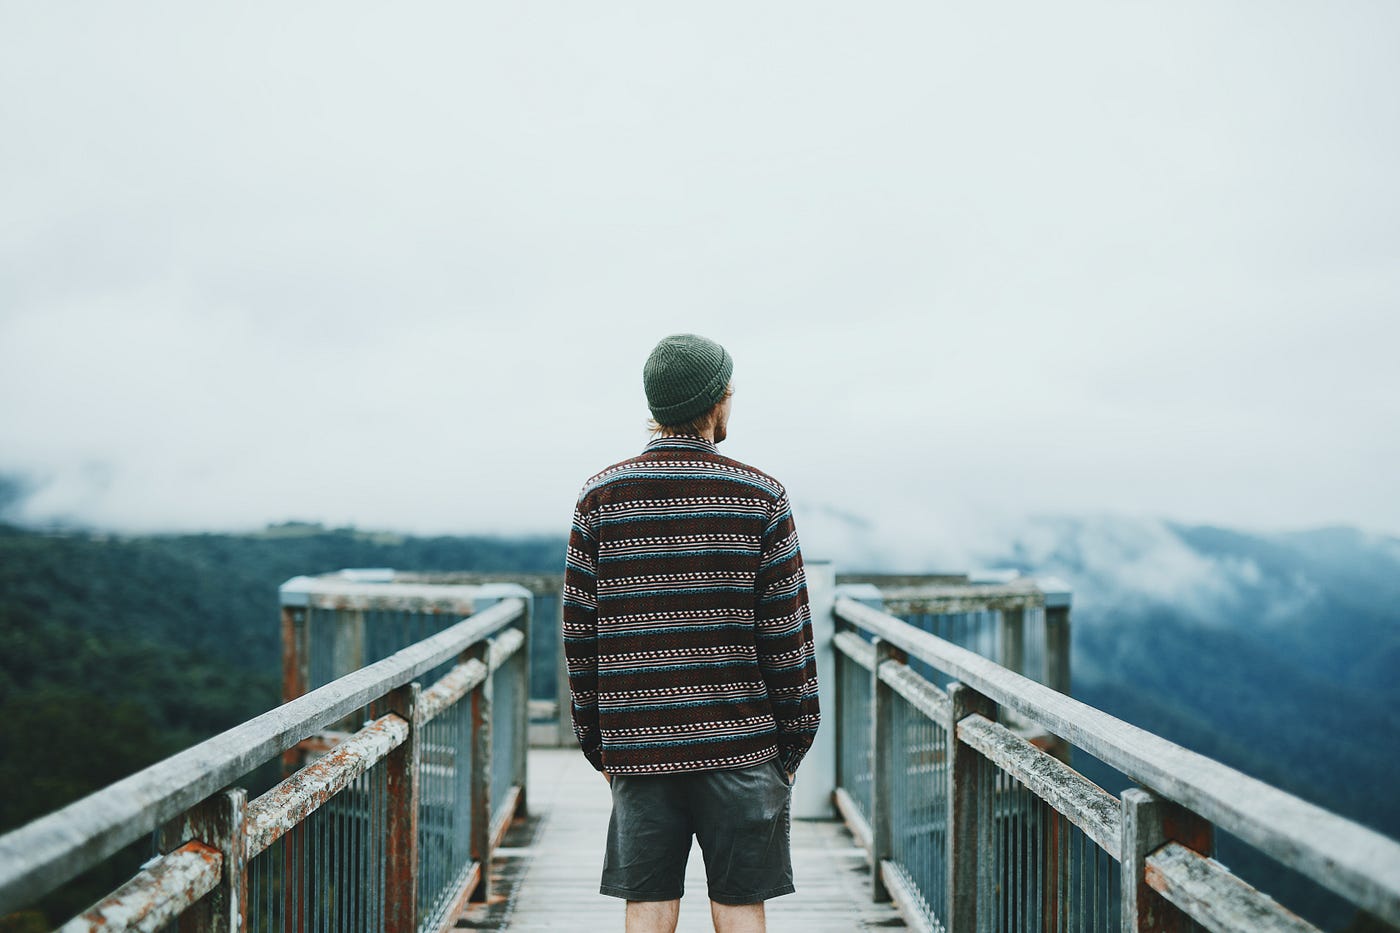 “A man in a beanie on an observation deck looking 